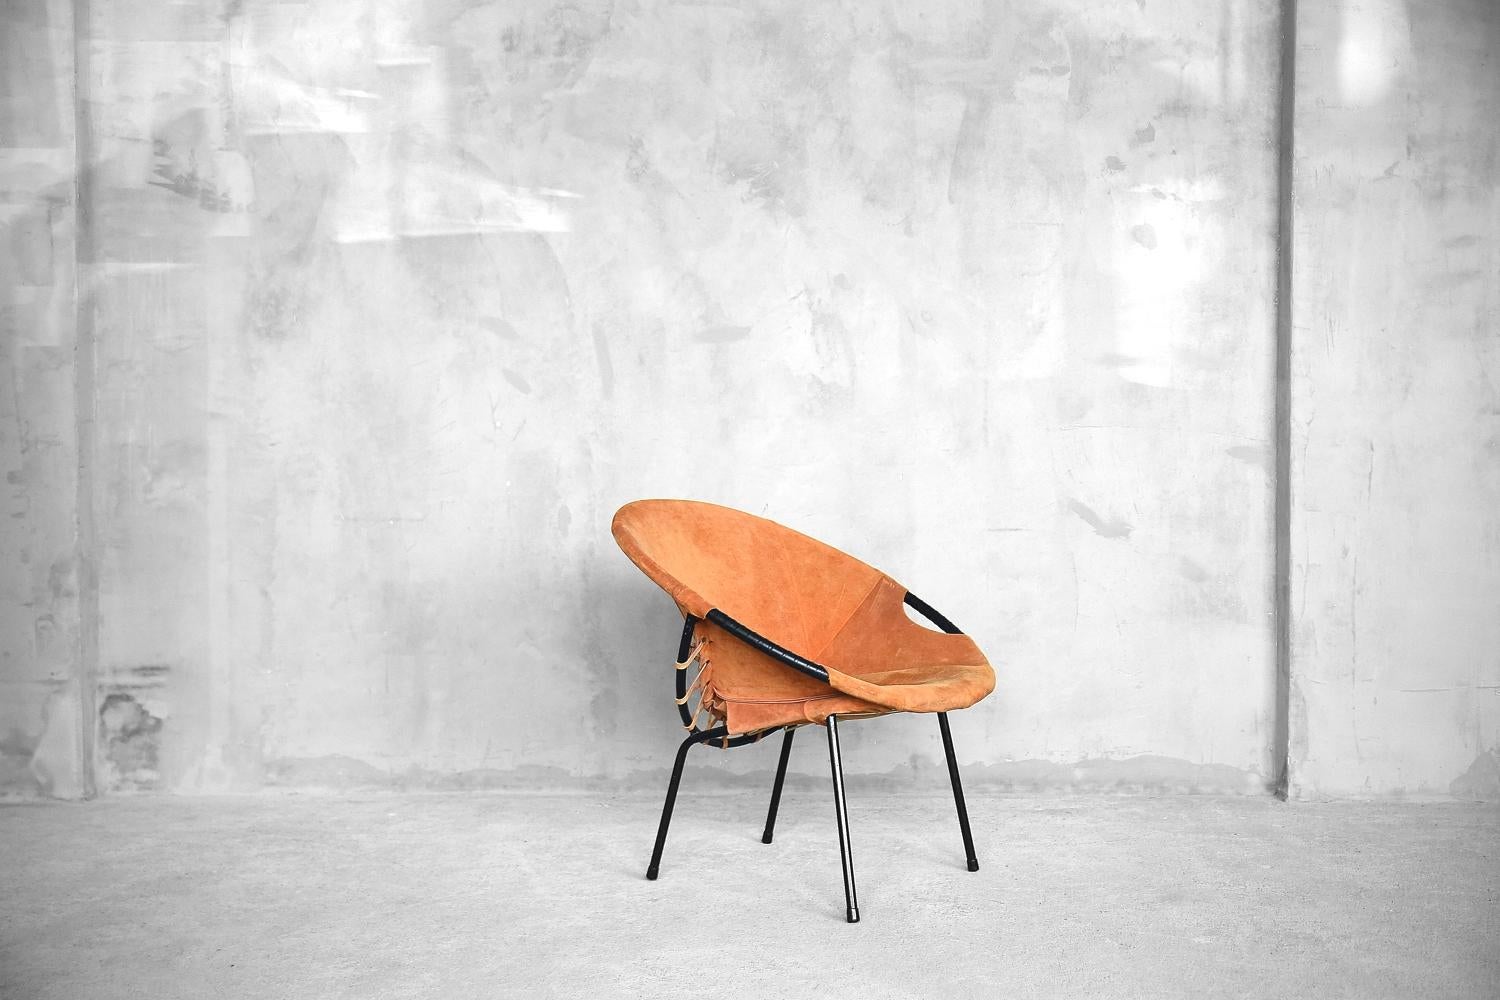 Vintage Mid-Century German Modern Suede Circle Balloon Chair from Lusch & Co In Good Condition For Sale In Warszawa, Mazowieckie